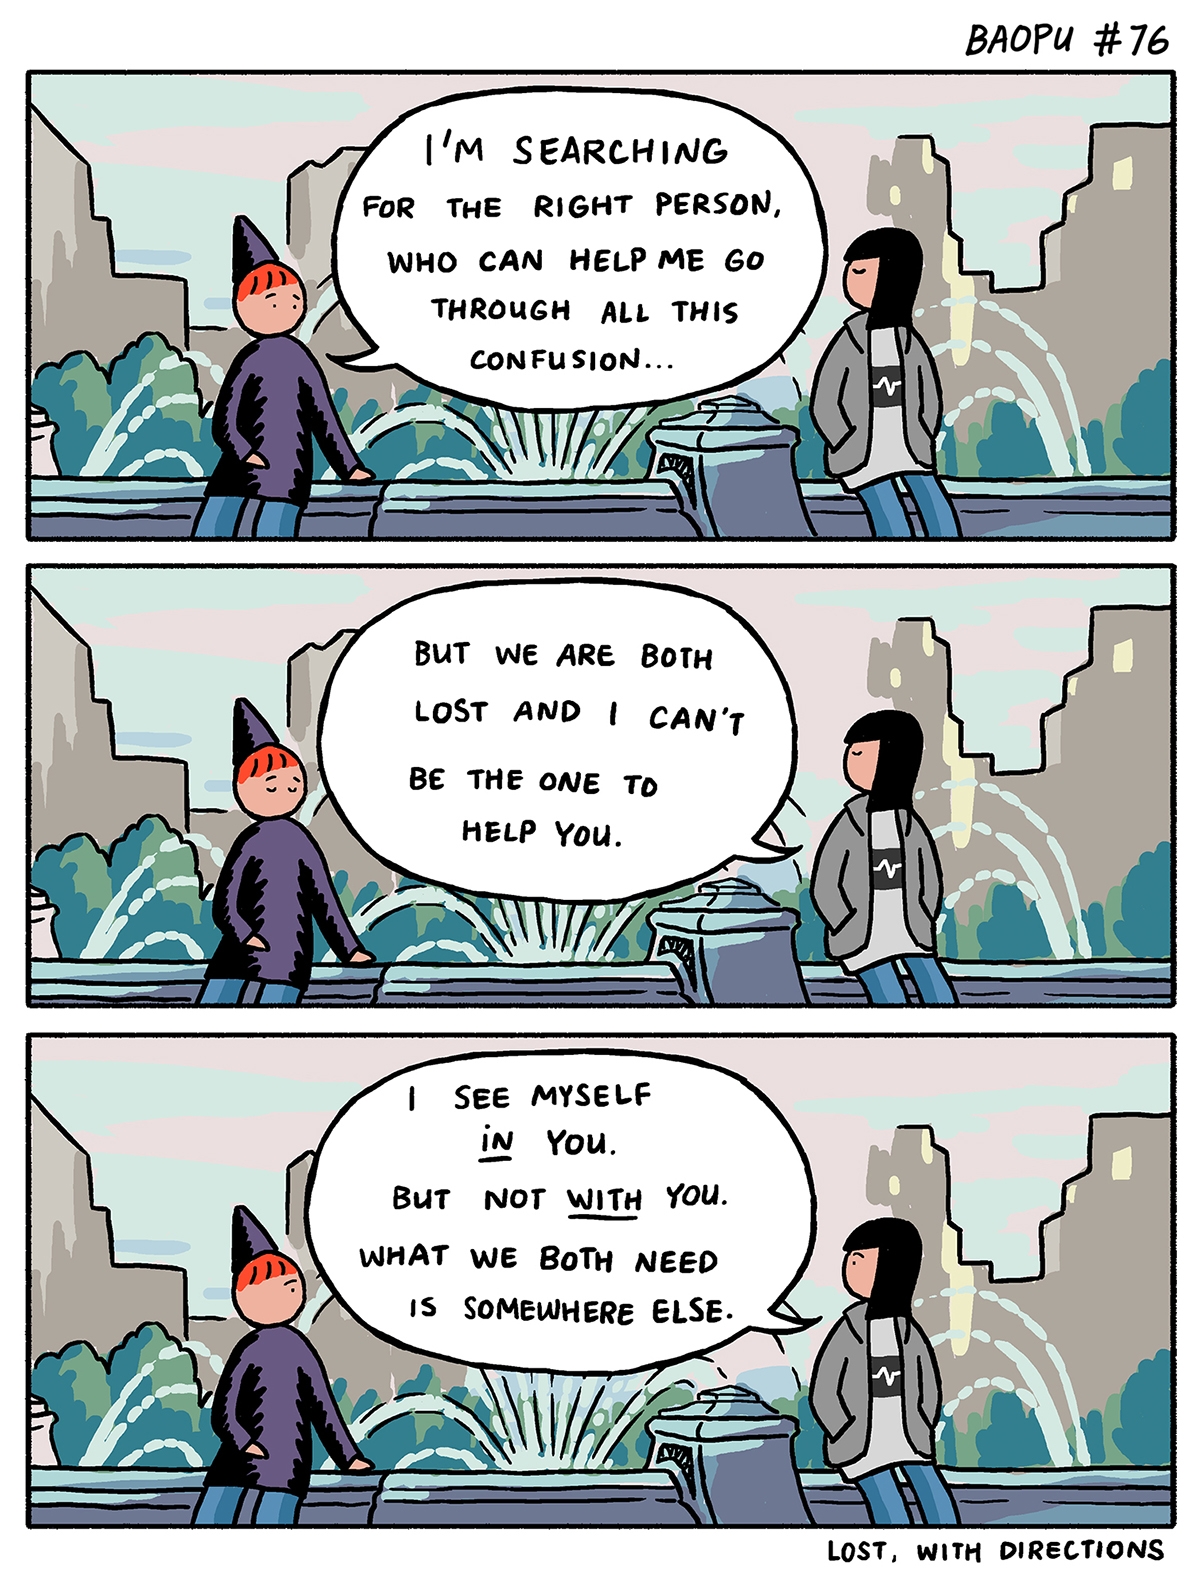 A cartoon of two friends sit on a park bench. One has short red hair and a pointy hat. The other has jet black hair to their shoulders and green jacket. The friend with red hair says, "I'm searching for the right person, who can help me through all this confusion. The friend in the green jacket responds, "But we are both lost and I can't be the one to help you. I see myself in you, but not with you. What we both need is somewhere else.